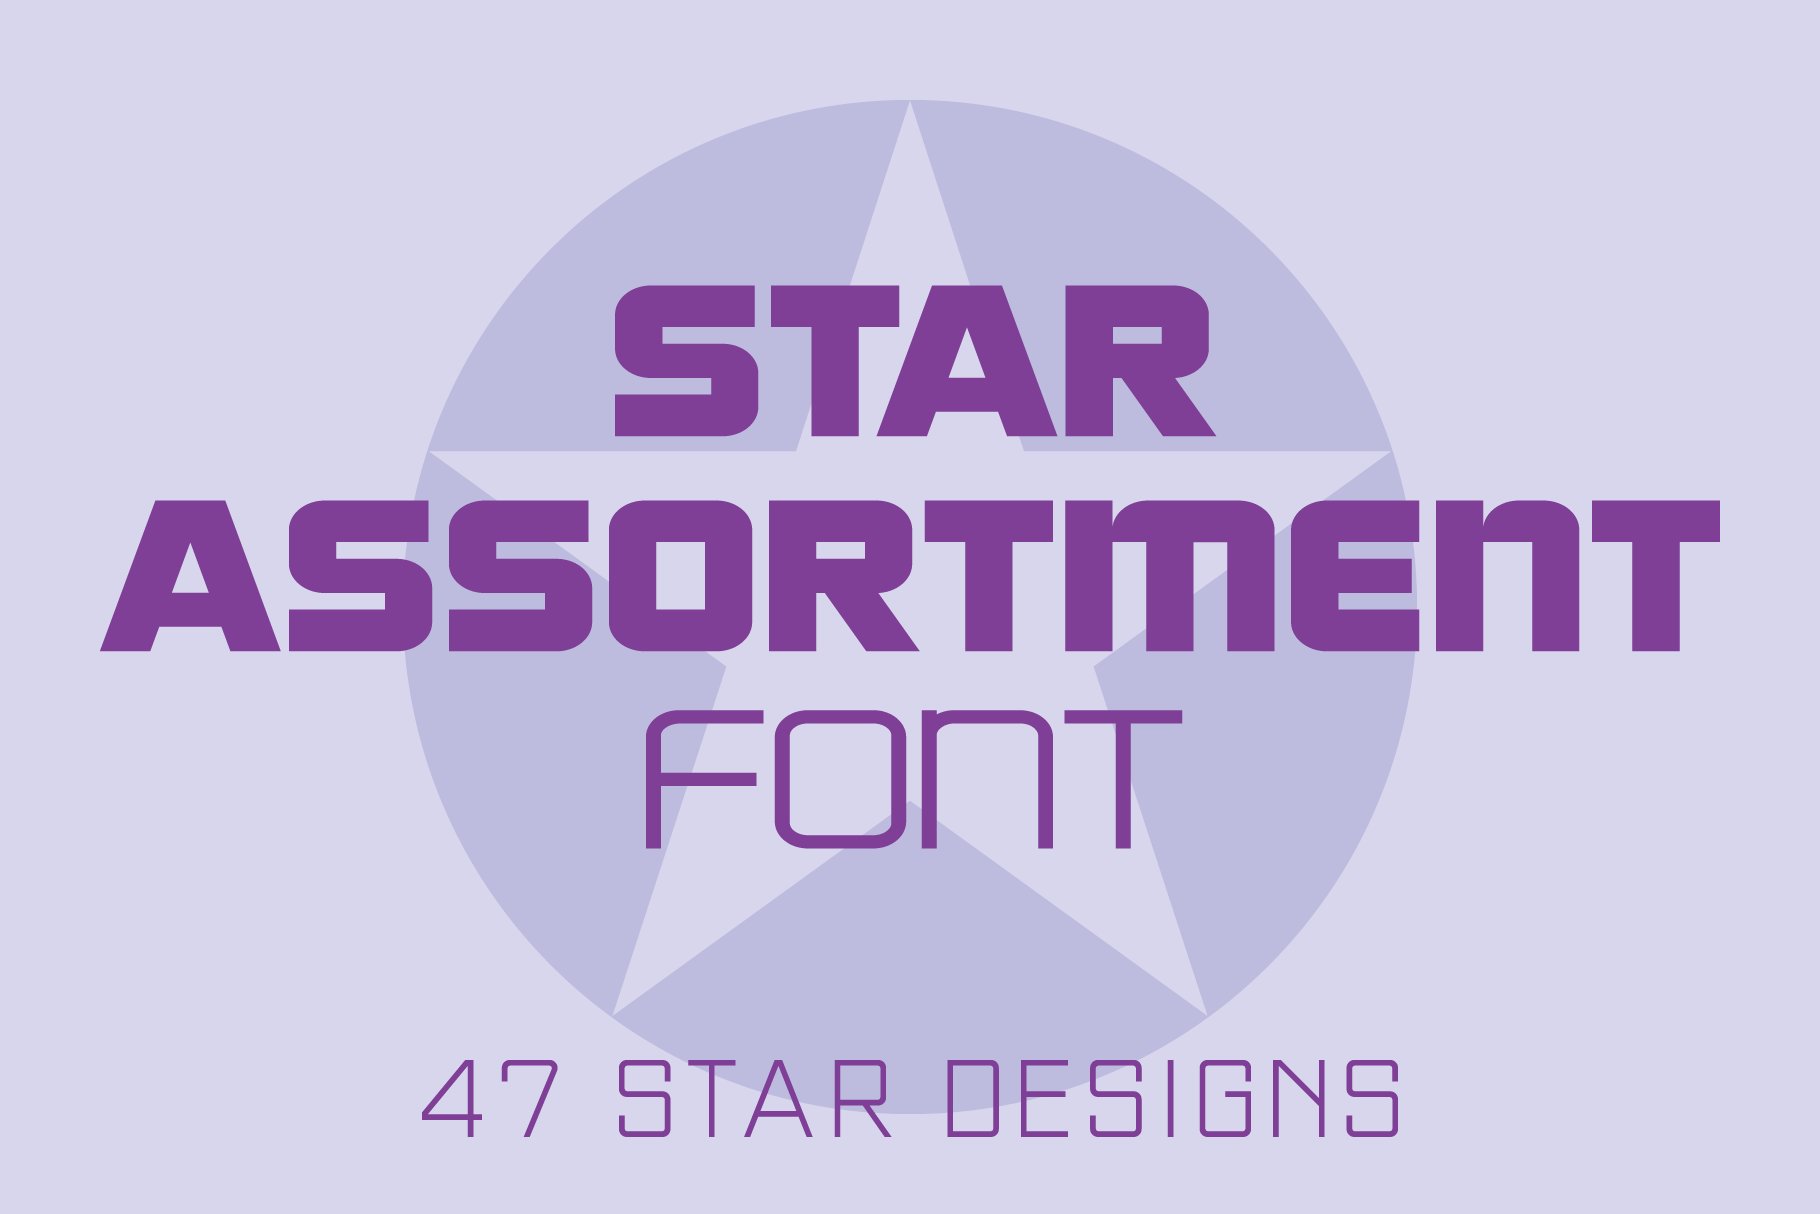 Star Assortment Font cover image.